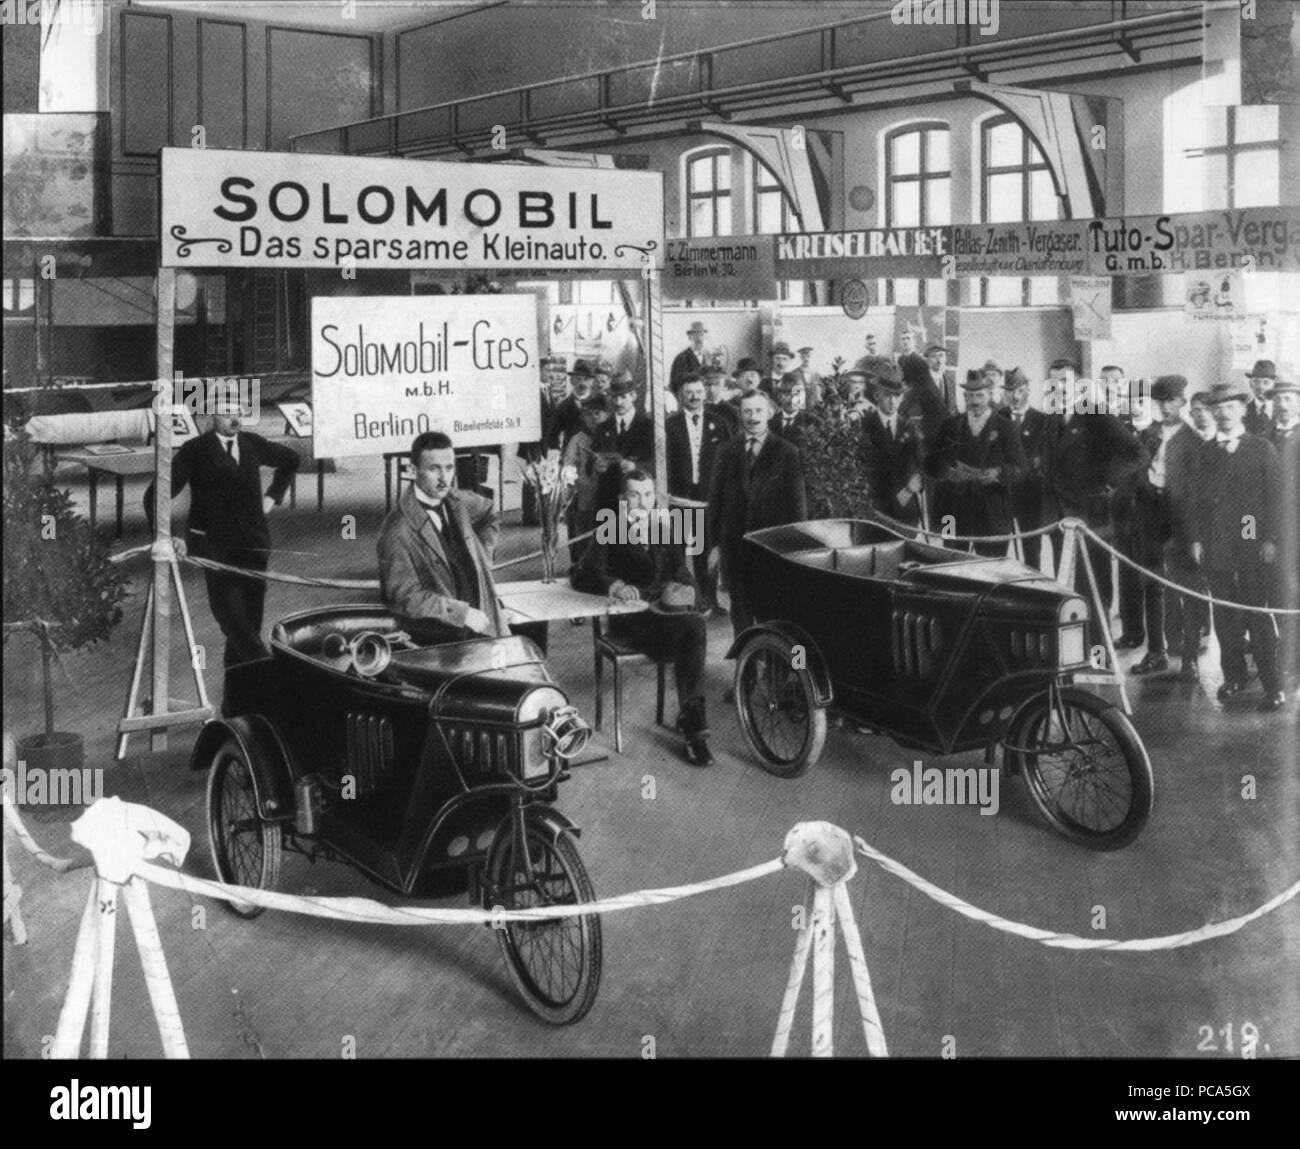 L'AHW Messestand Solomobil Herbstmesse Leipzig GmbH 1919. Banque D'Images